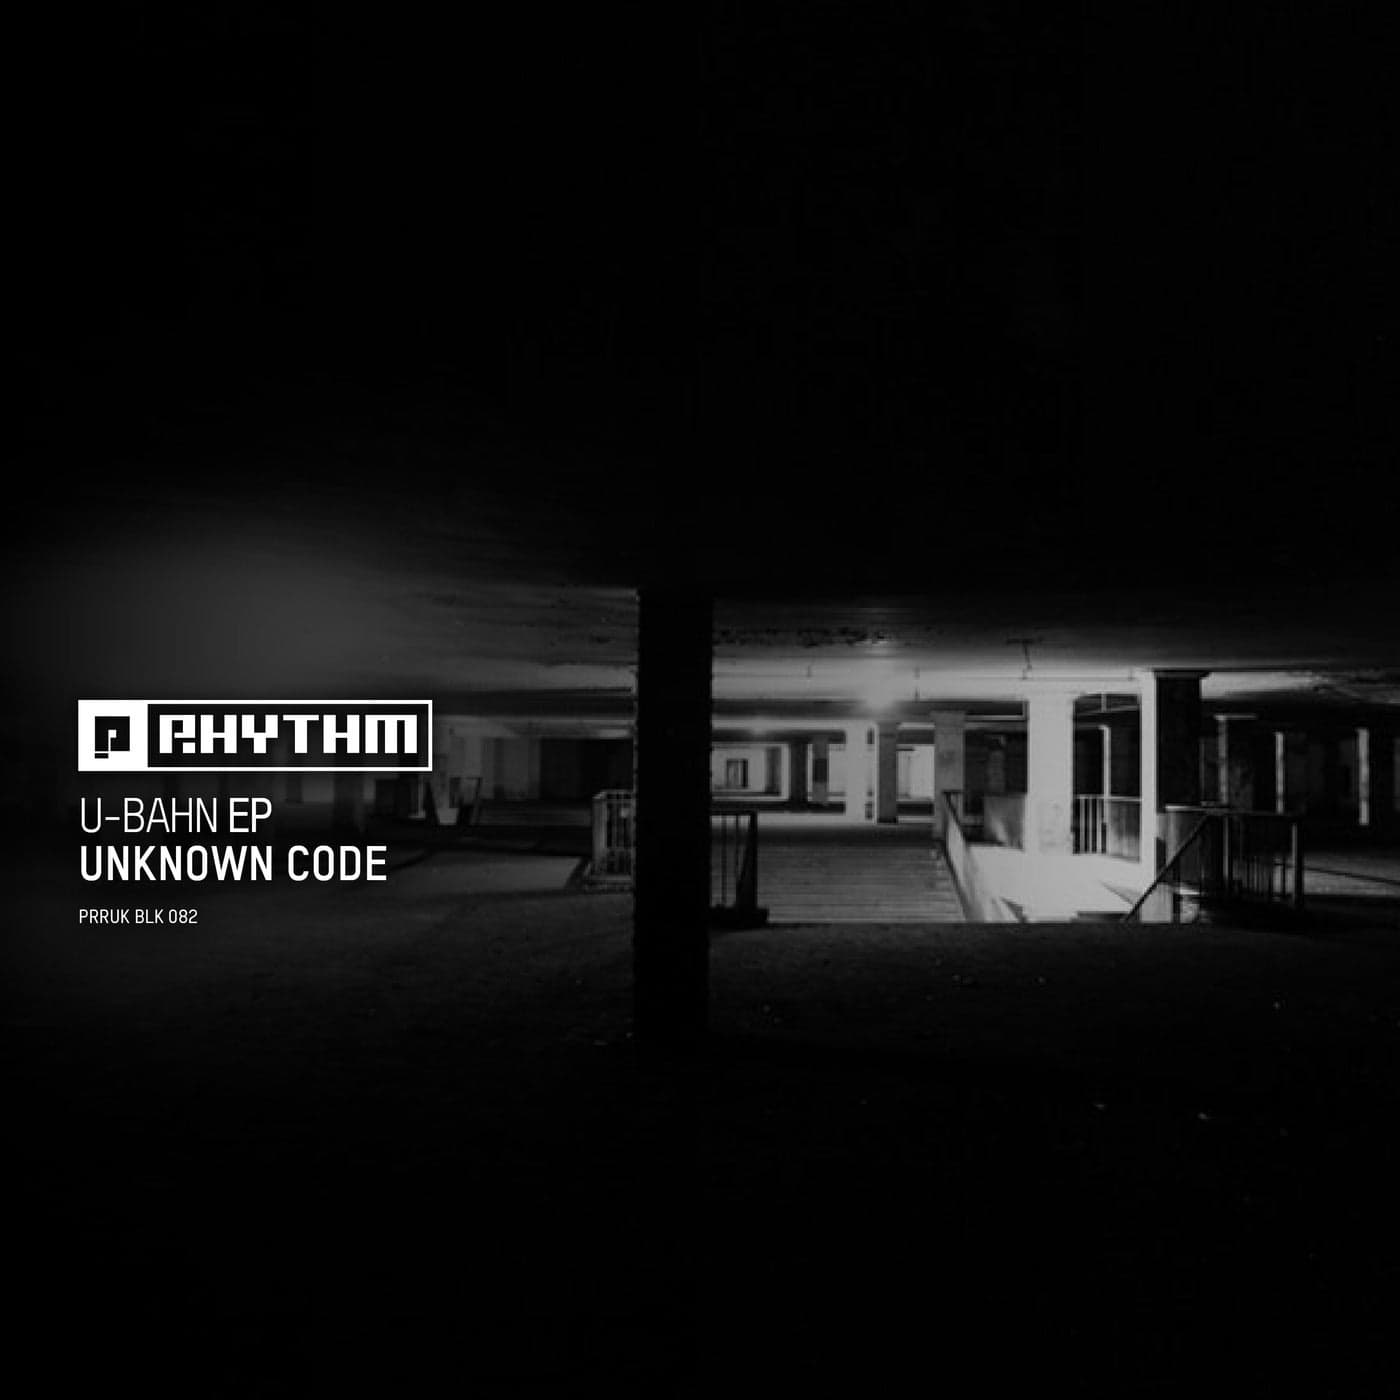 image cover: U-Bahn EP by Unknown Code on Planet Rhythm